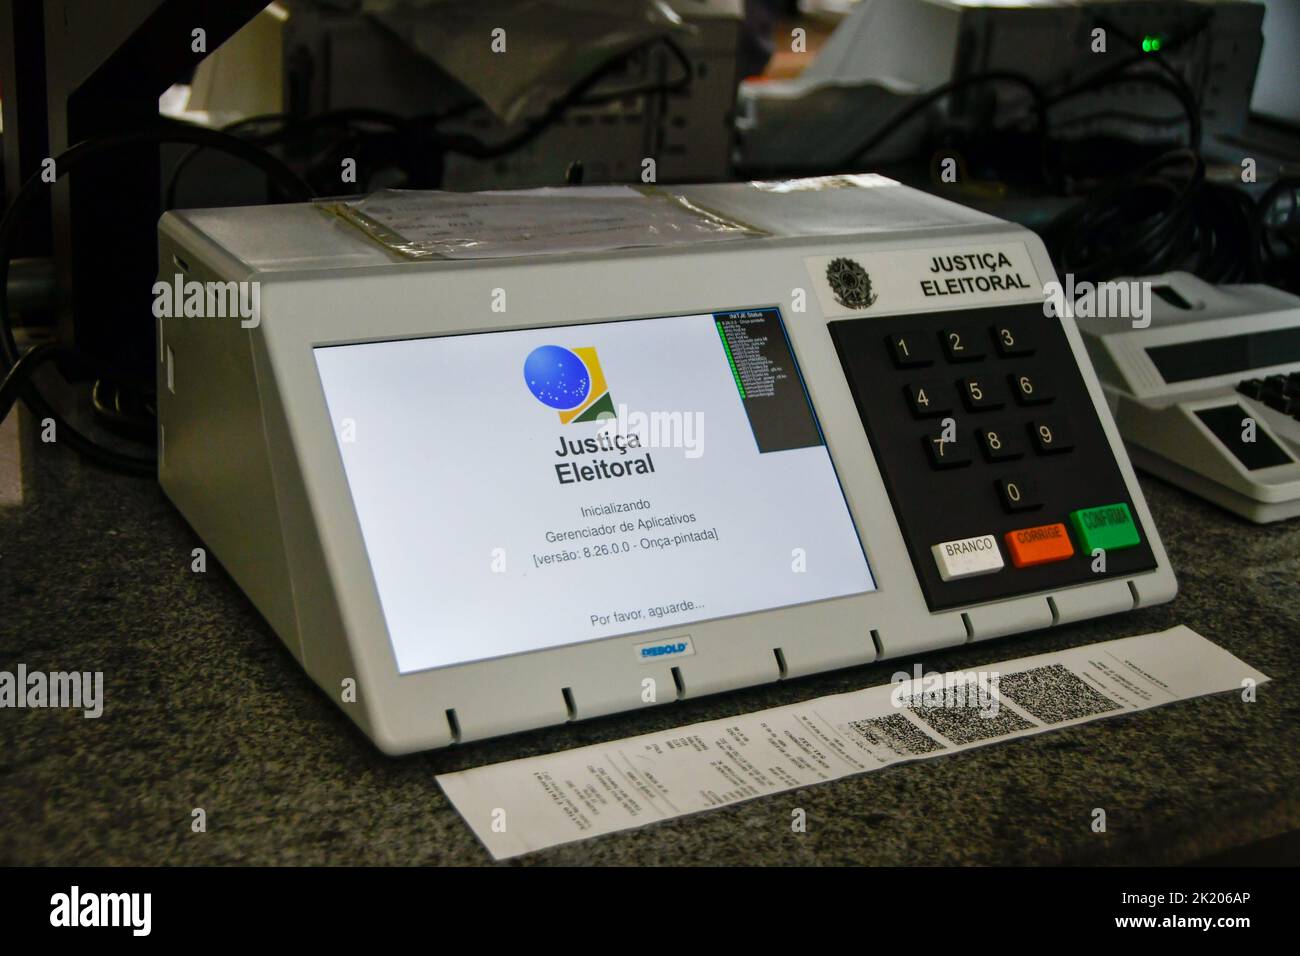 BRASÍLIA, DF - 21.09.2022: TRE REALIZA LACRAÇÃO DAS URNAS ELETRÔNICAS - Photo, Electronic Urn during review for sealing. This Wednesday (21) the TRE of the Federal District began the process of sealing and putting in boxes the electronic ballot boxes to distribute in the region's elections. (Photo: Ton Molina/Fotoarena) Stock Photo